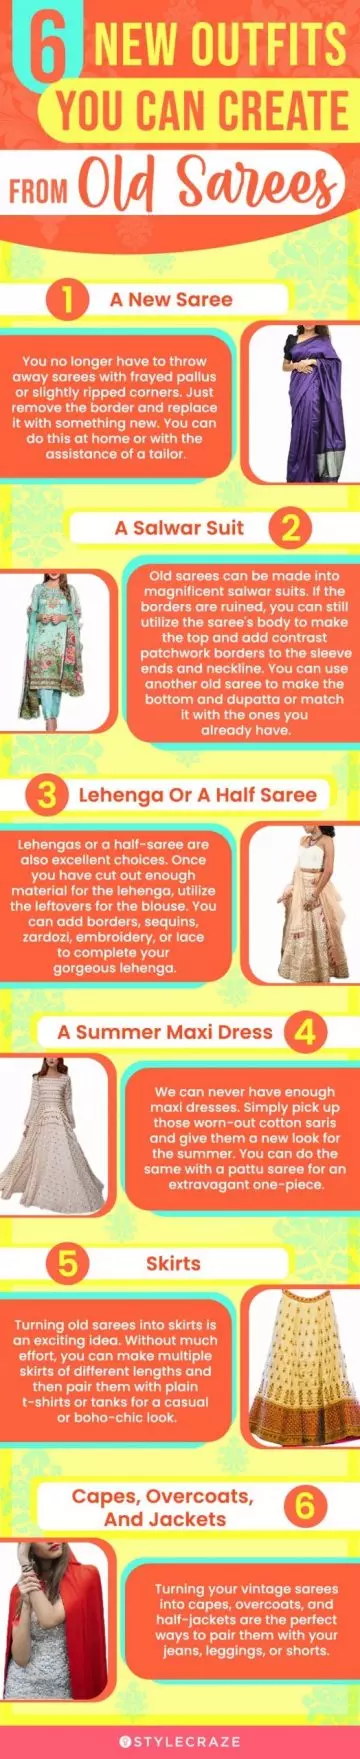 six new outfits you can create from old sarees (infographic)